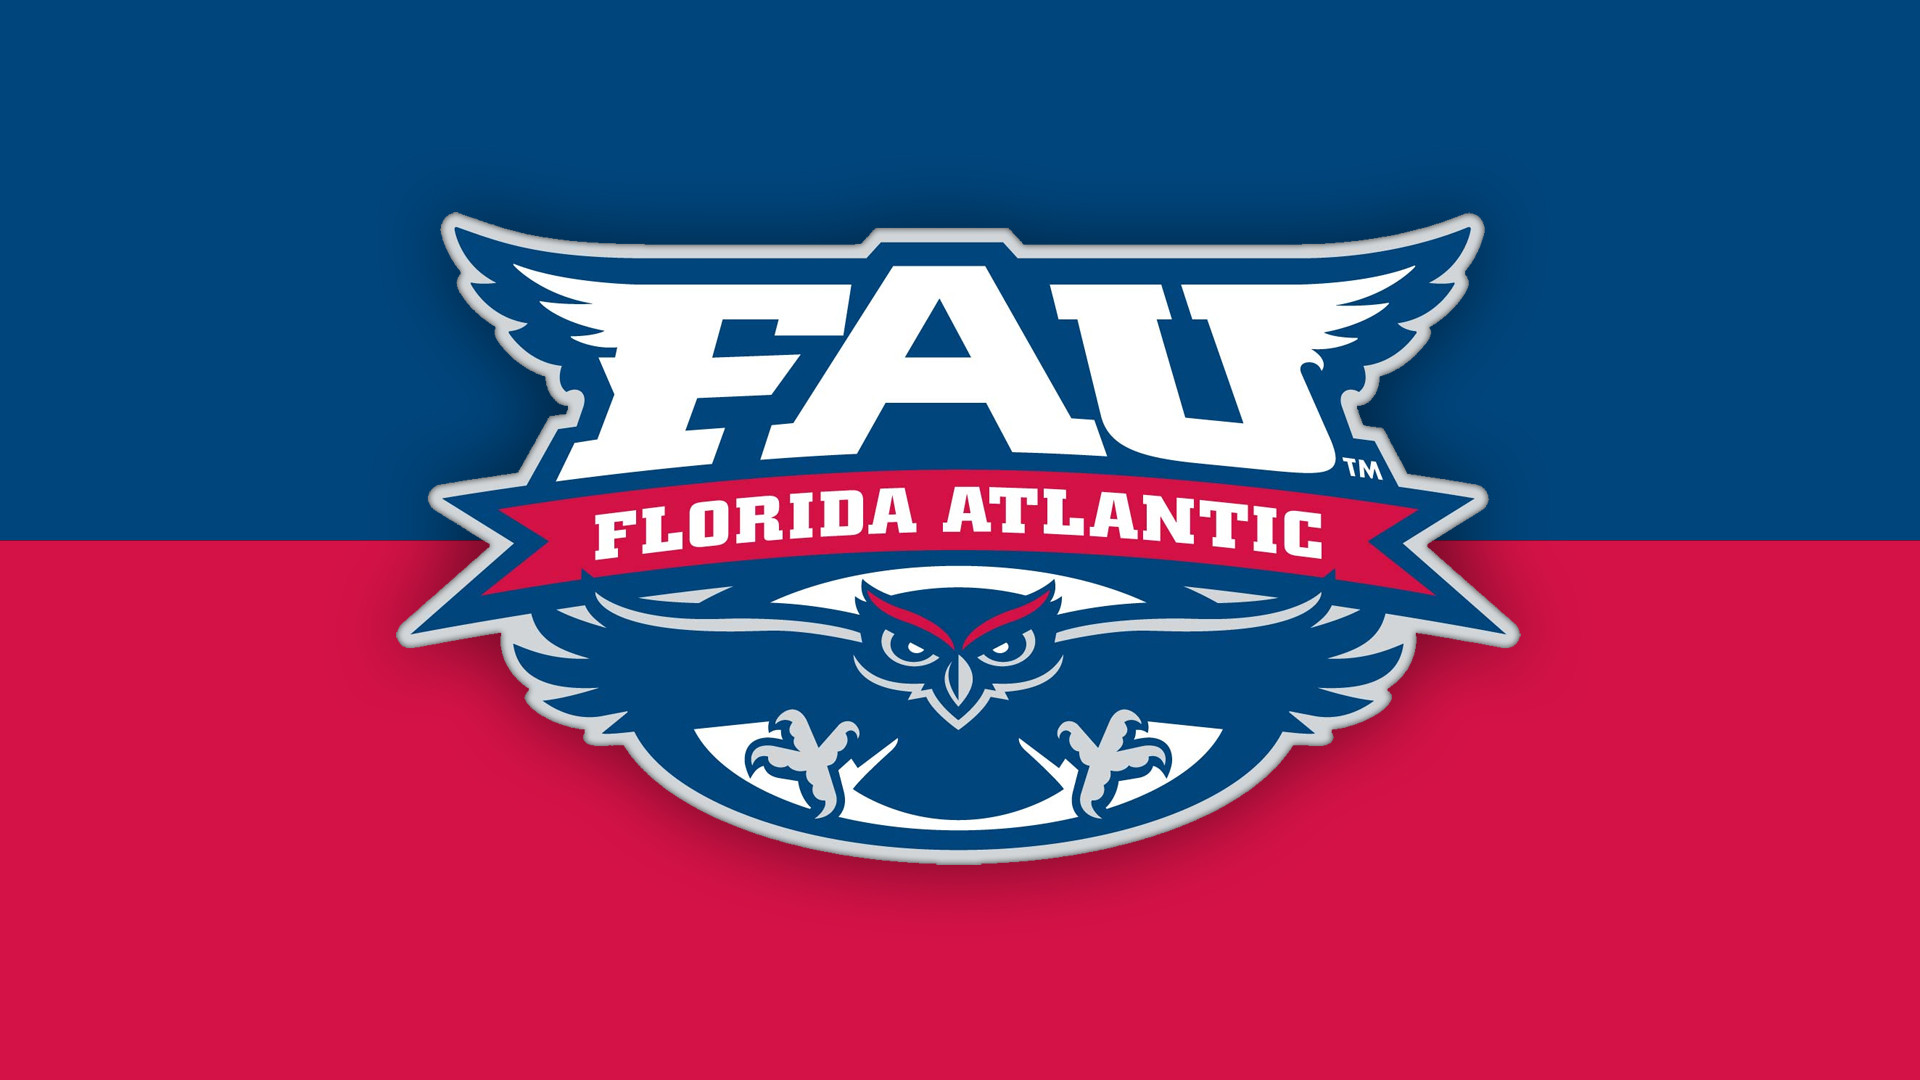 Fau Reclaims Some Cash A Word Or Two About Felines And Let The